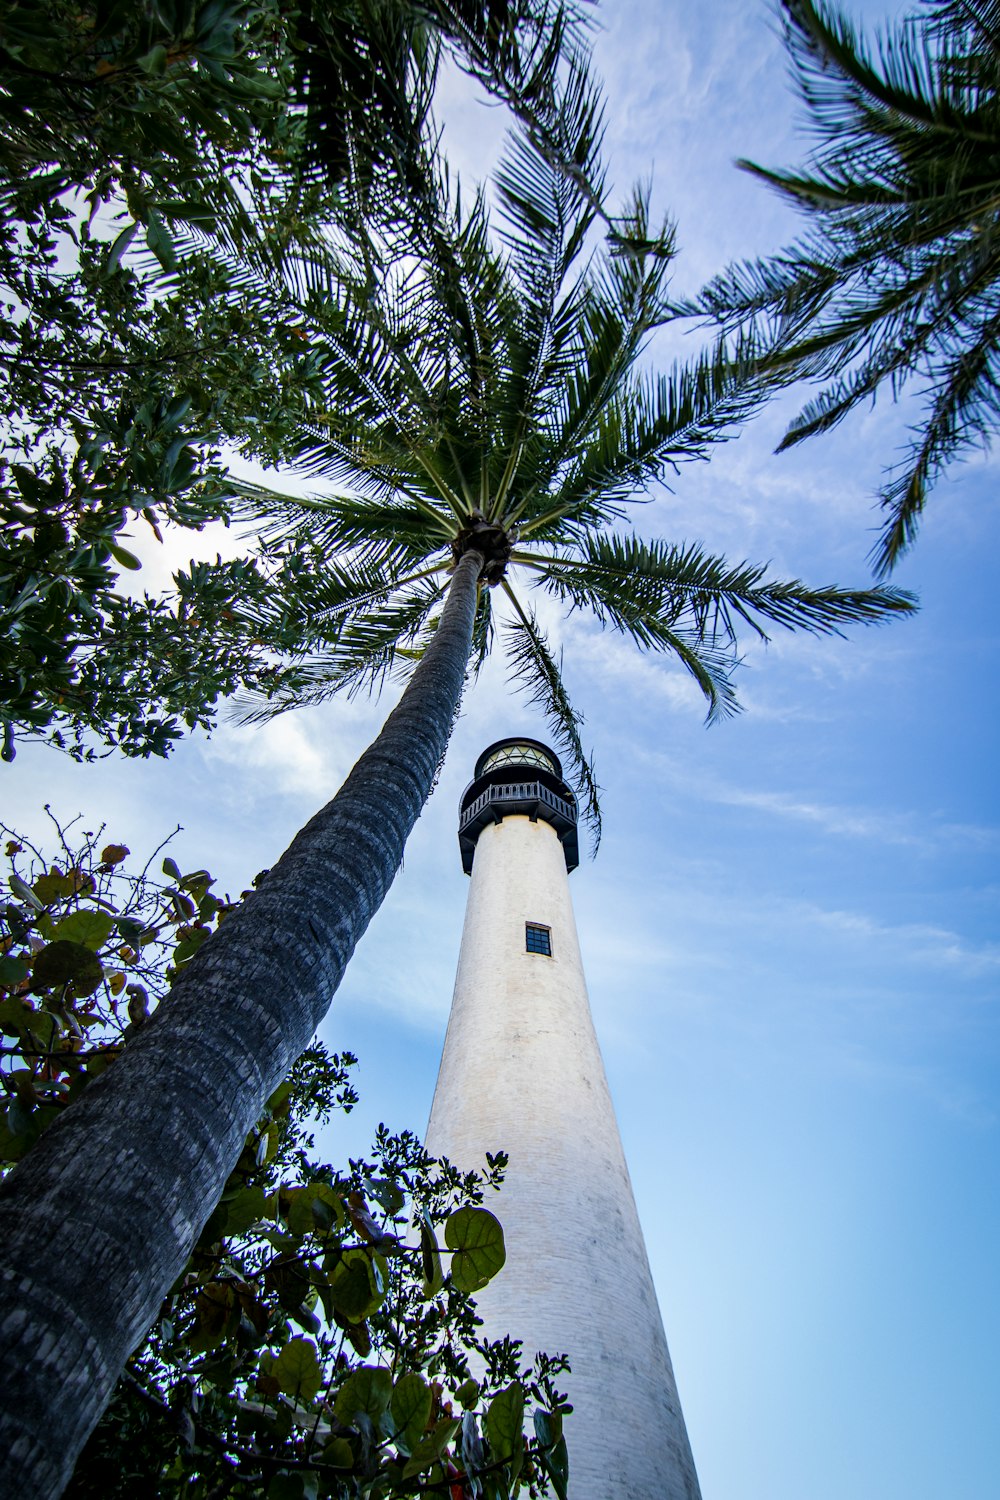 a tall palm tree next to a white lighthouse